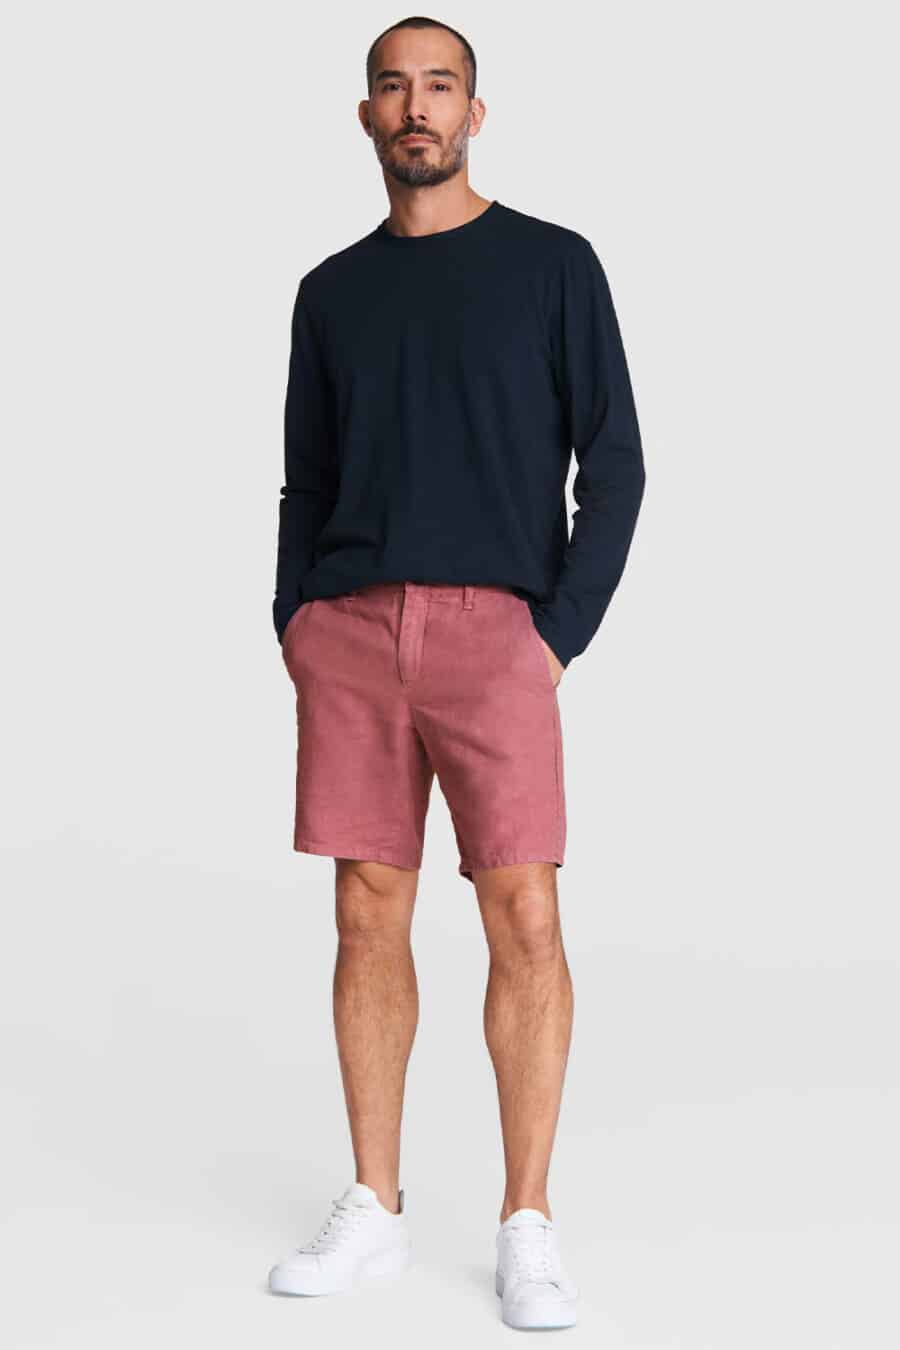 Men's pink shorts, long sleeve navy T-shirt top and white sneakers outfit